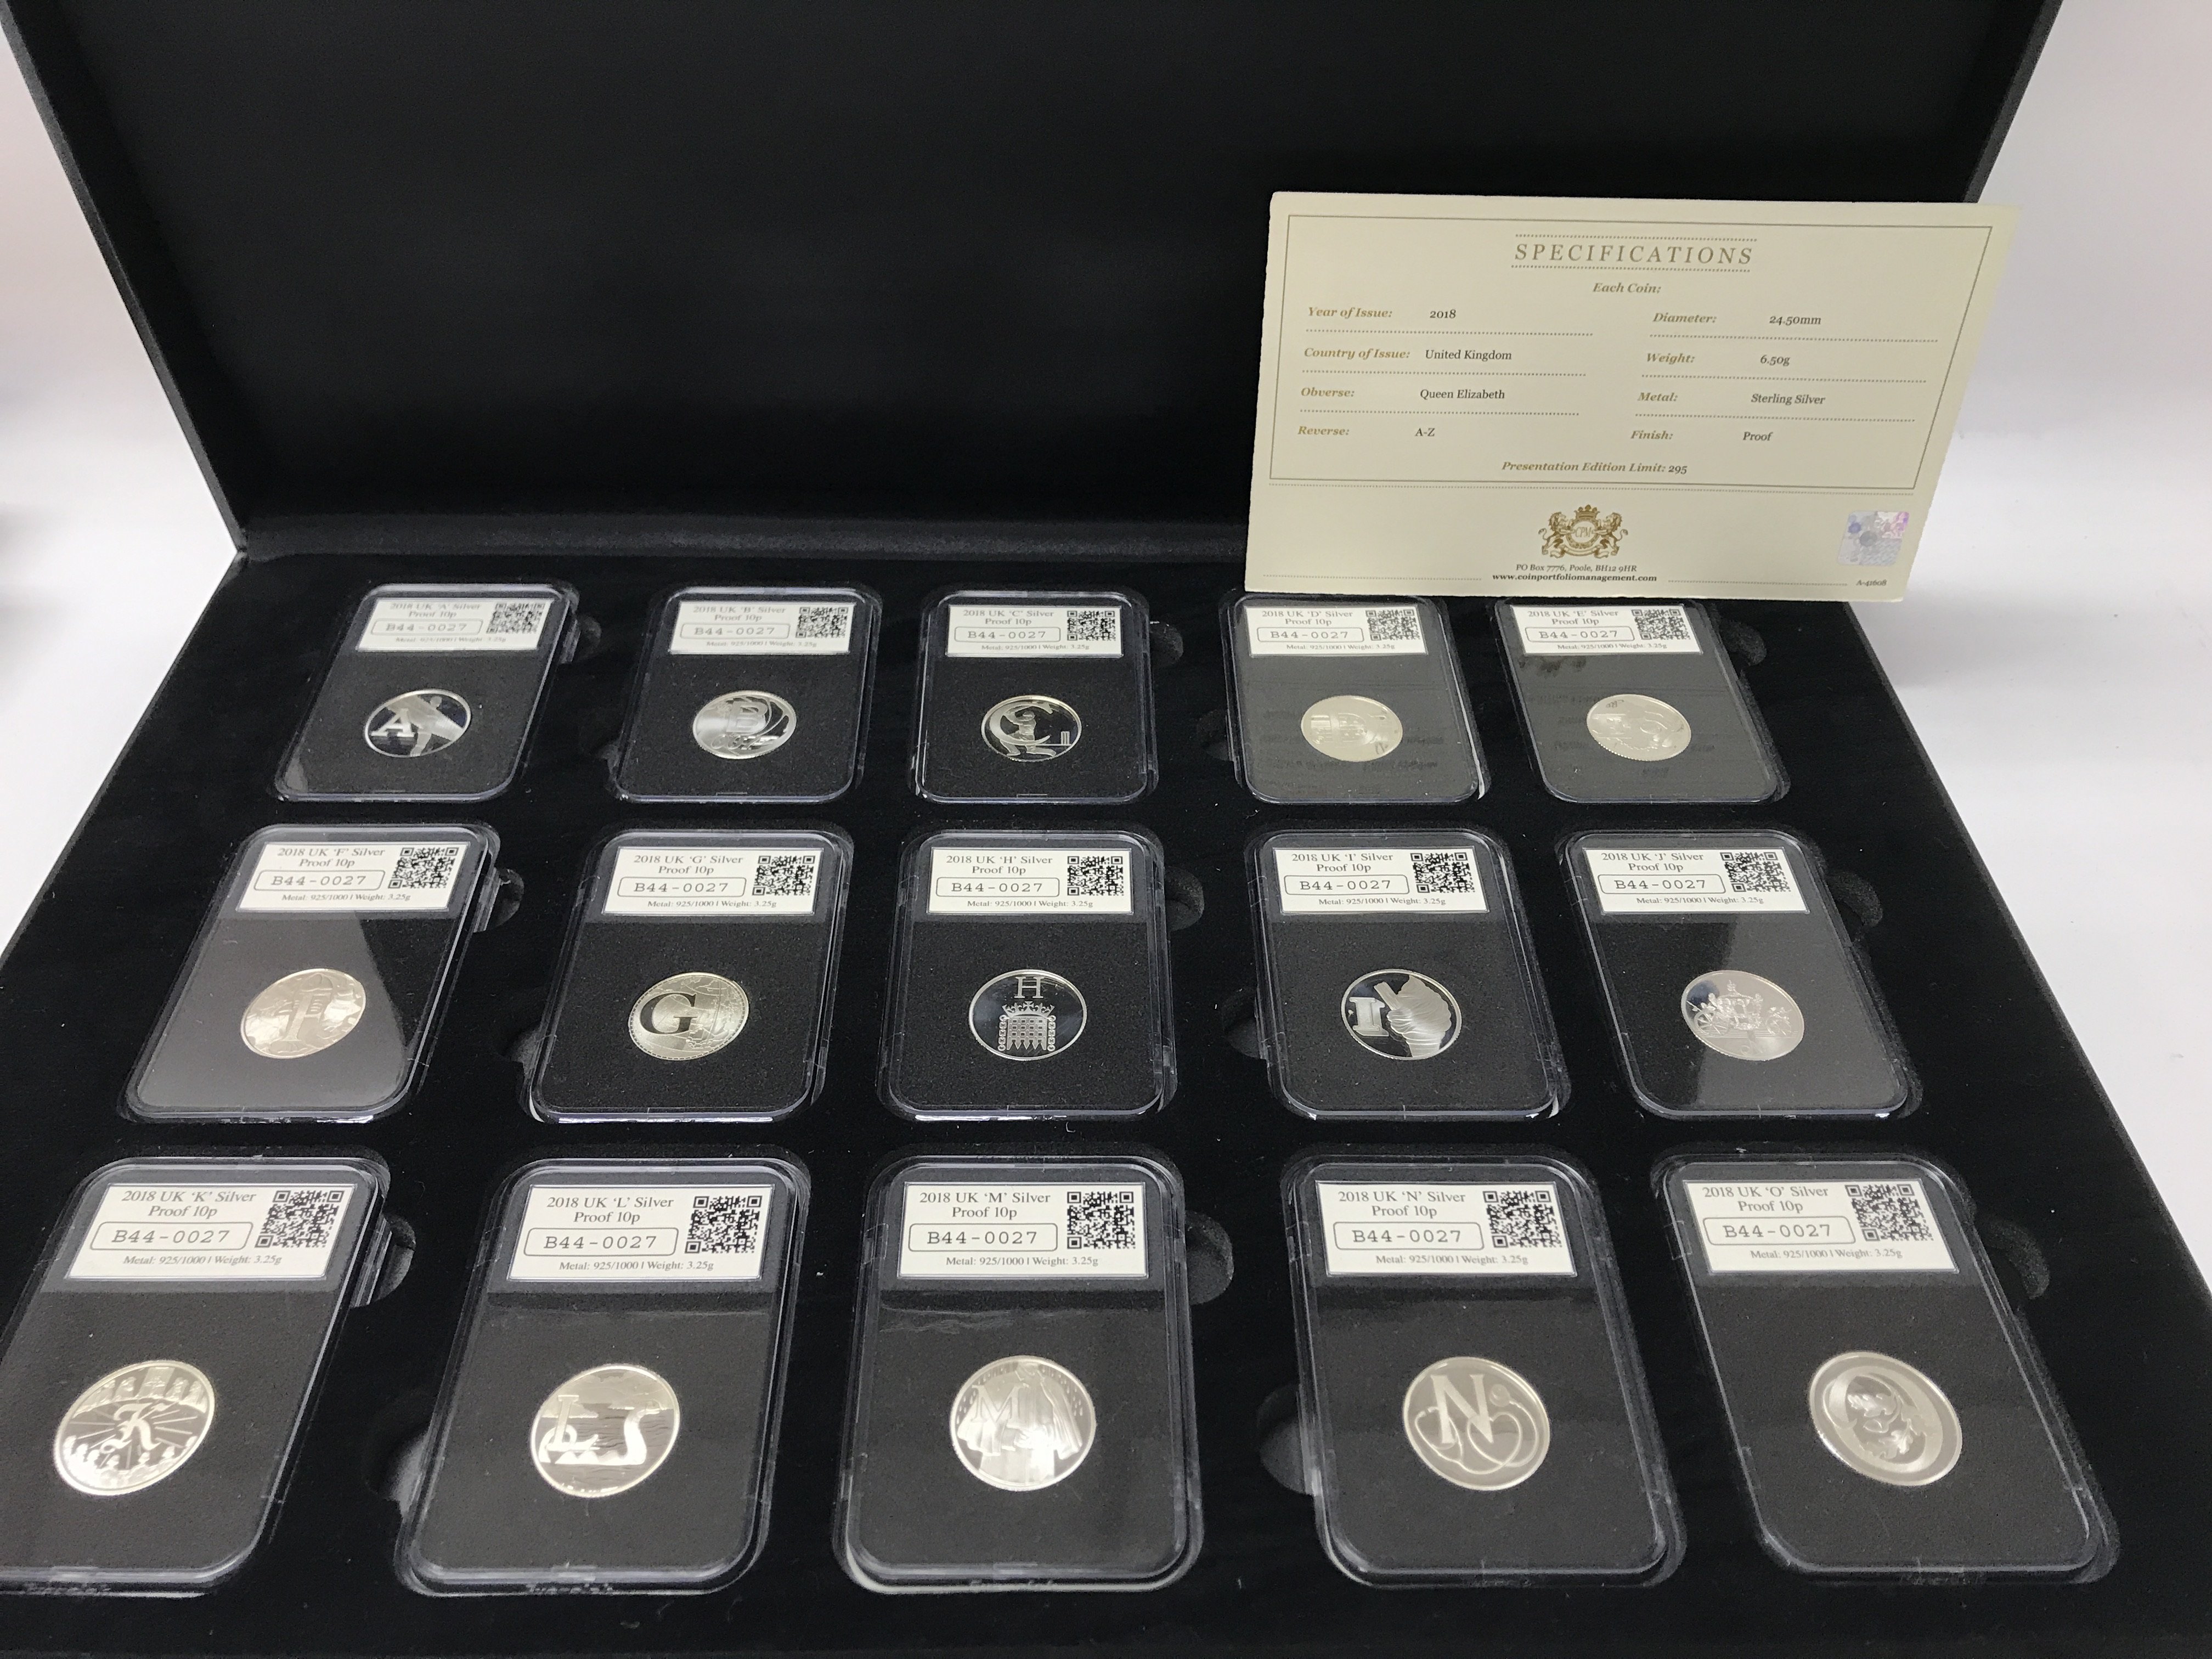 A silver coin set of 26 silver proof slapped coins